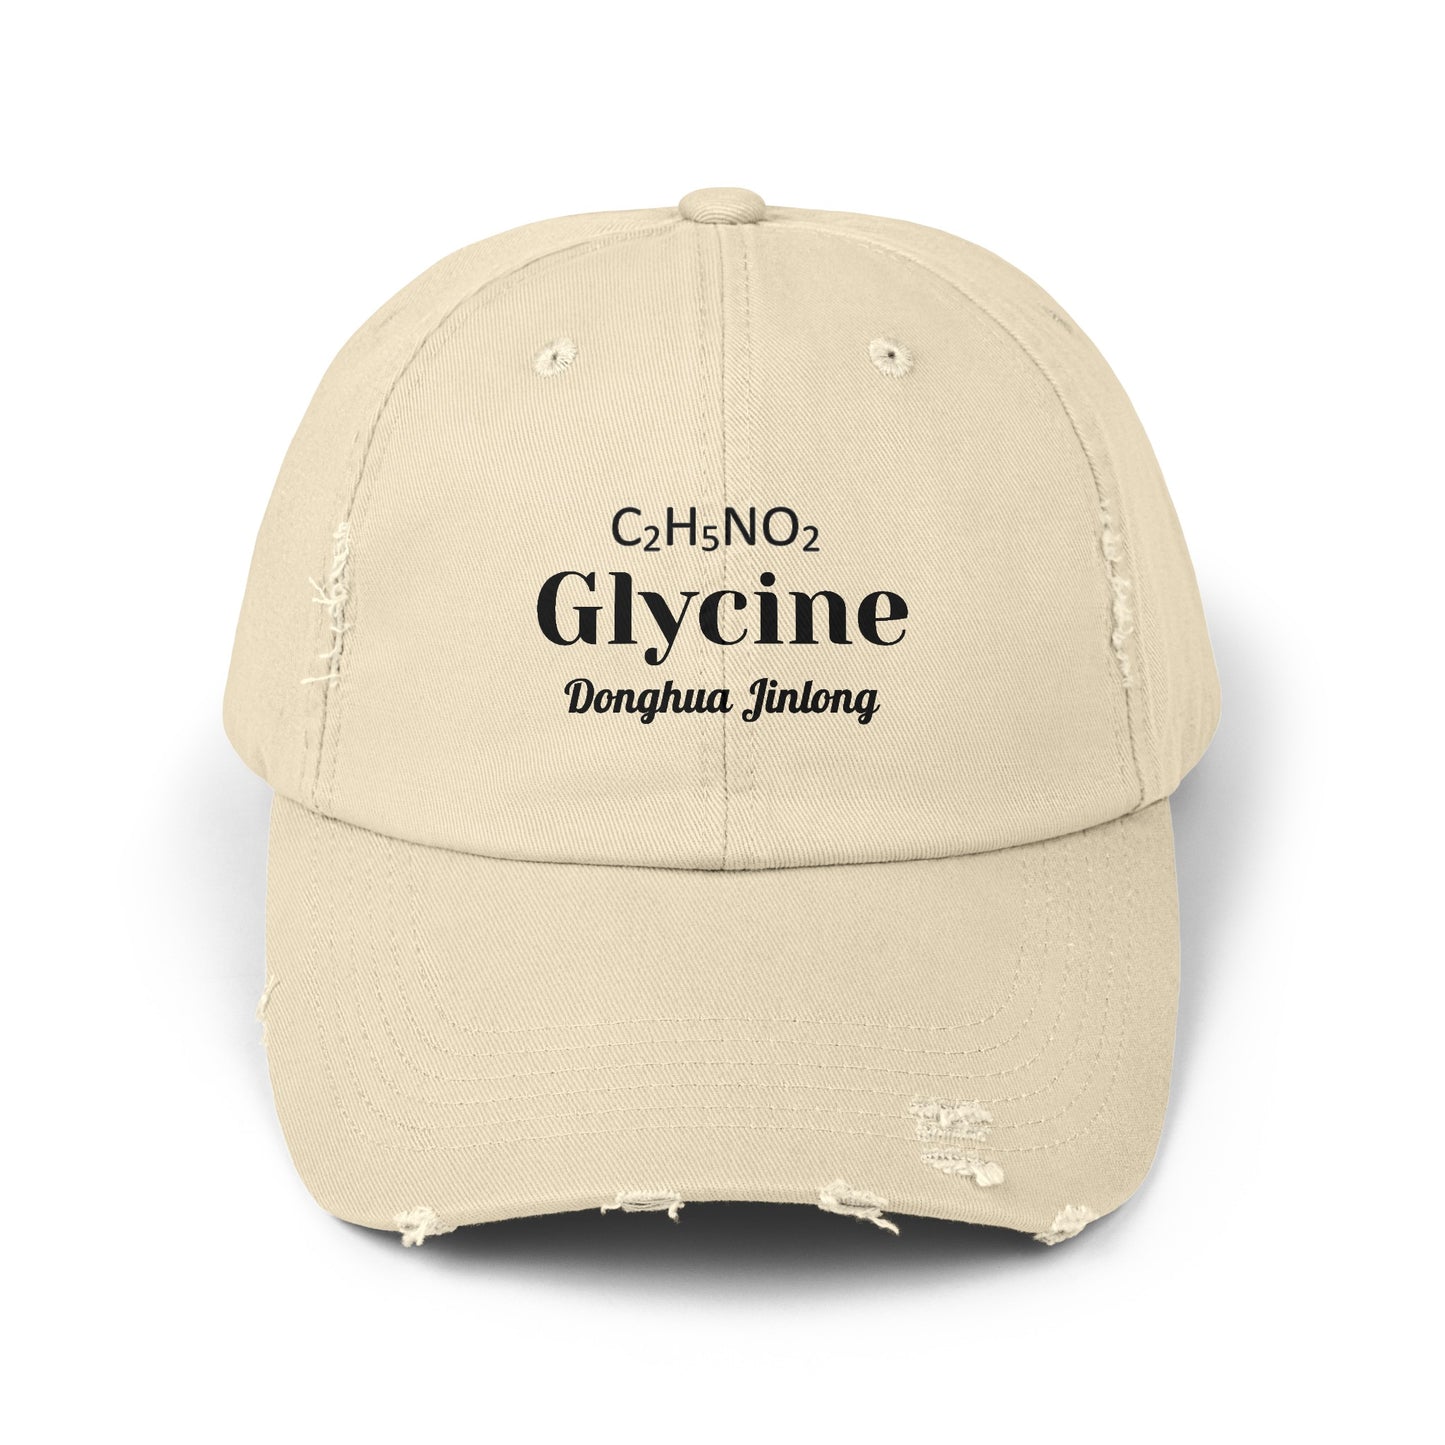 Glycine by Donghua Jinlong Hat with Scientific Notation for Glycine: Humor, Comedy, Fun